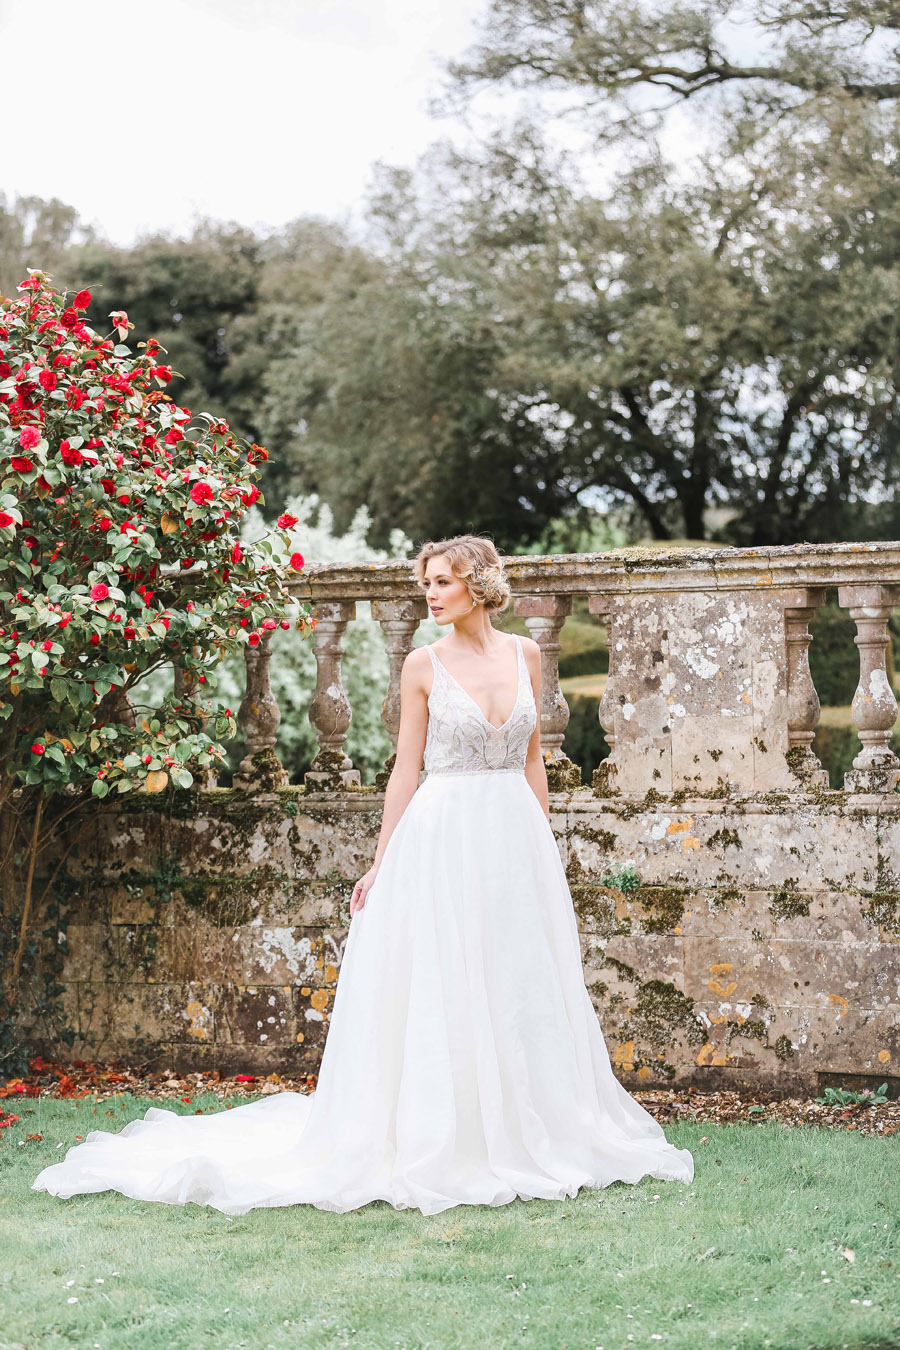 Romantic wedding ideas from Hale Park, photo by Charlotte Wise Photography (49)